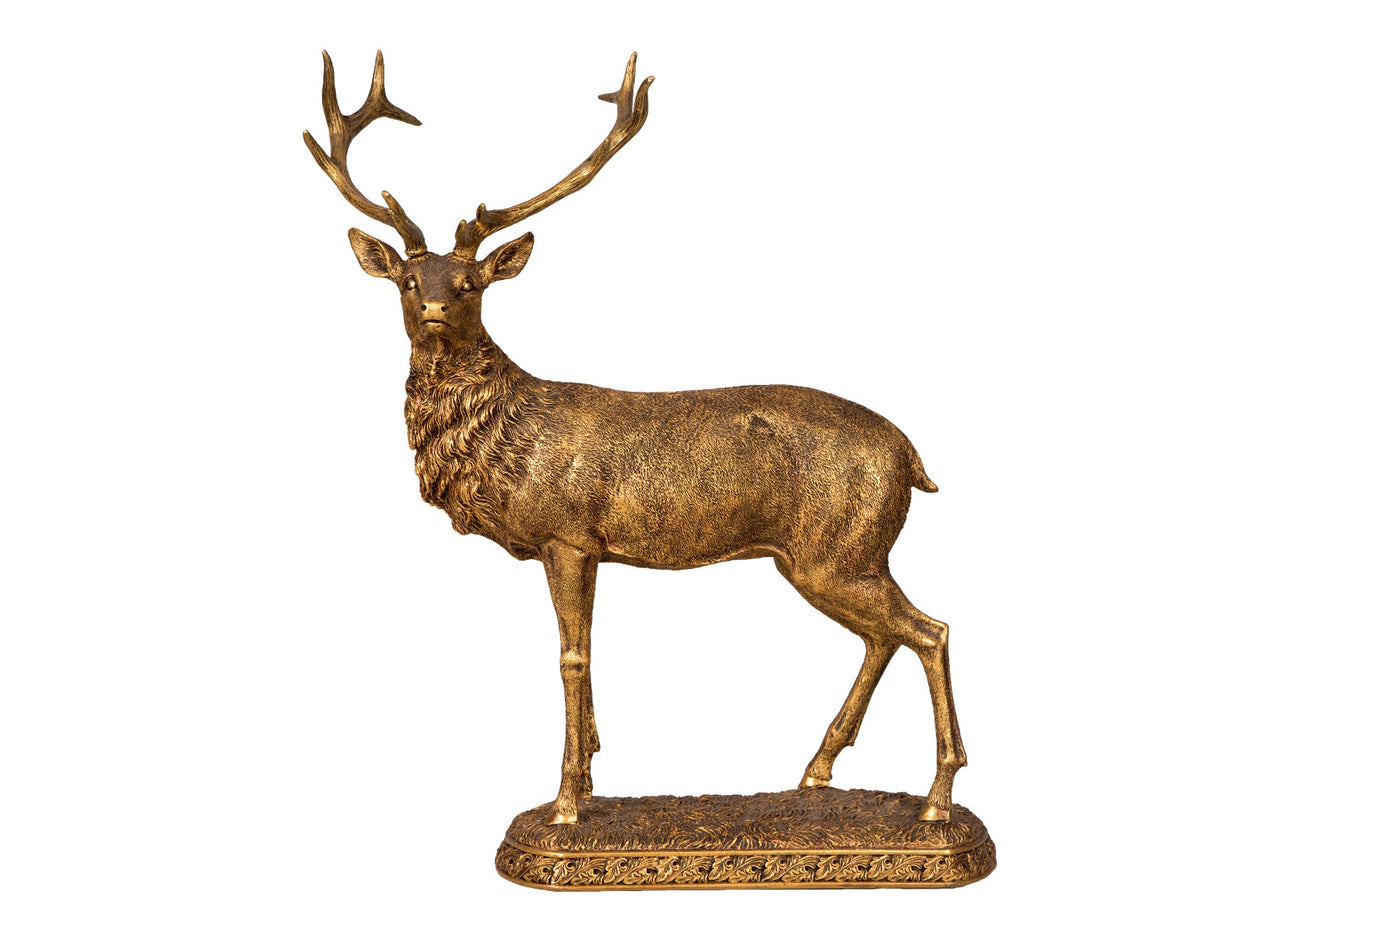 luxury tabletop decor reindeer statue for holiday decor